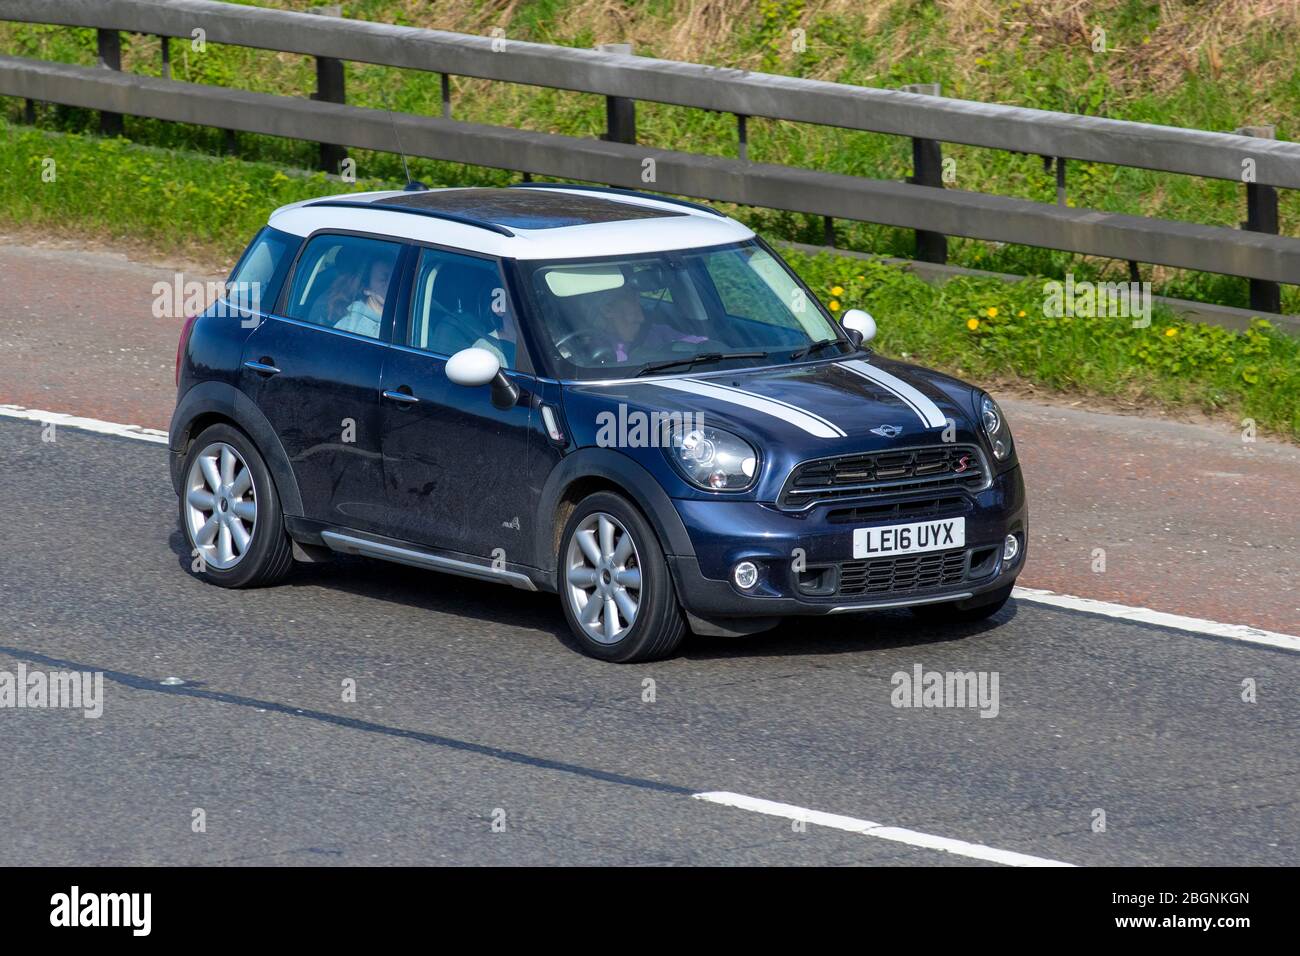 Mini Cooper Countryman High Resolution Stock Photography And Images Alamy